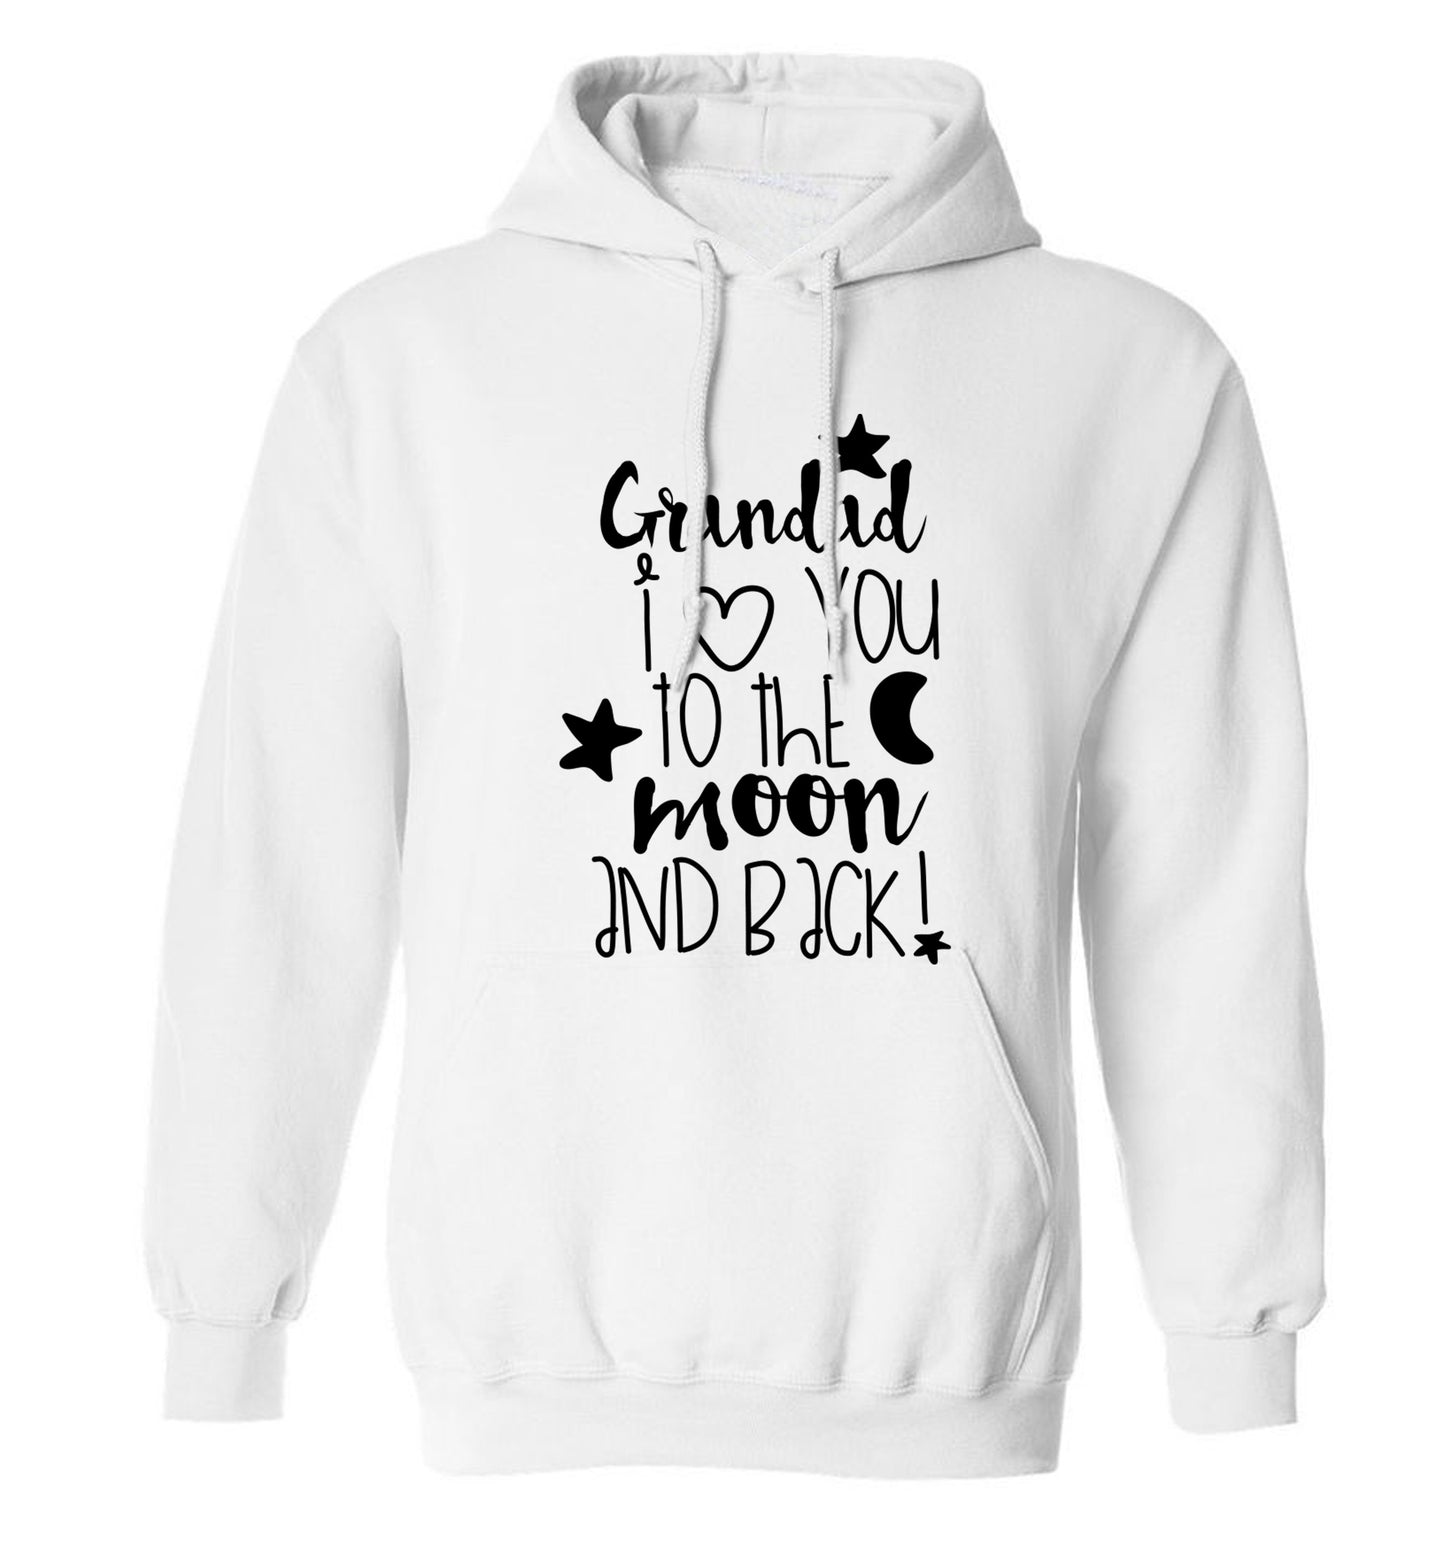 Grandad's I love you to the moon and back adults unisex white hoodie 2XL